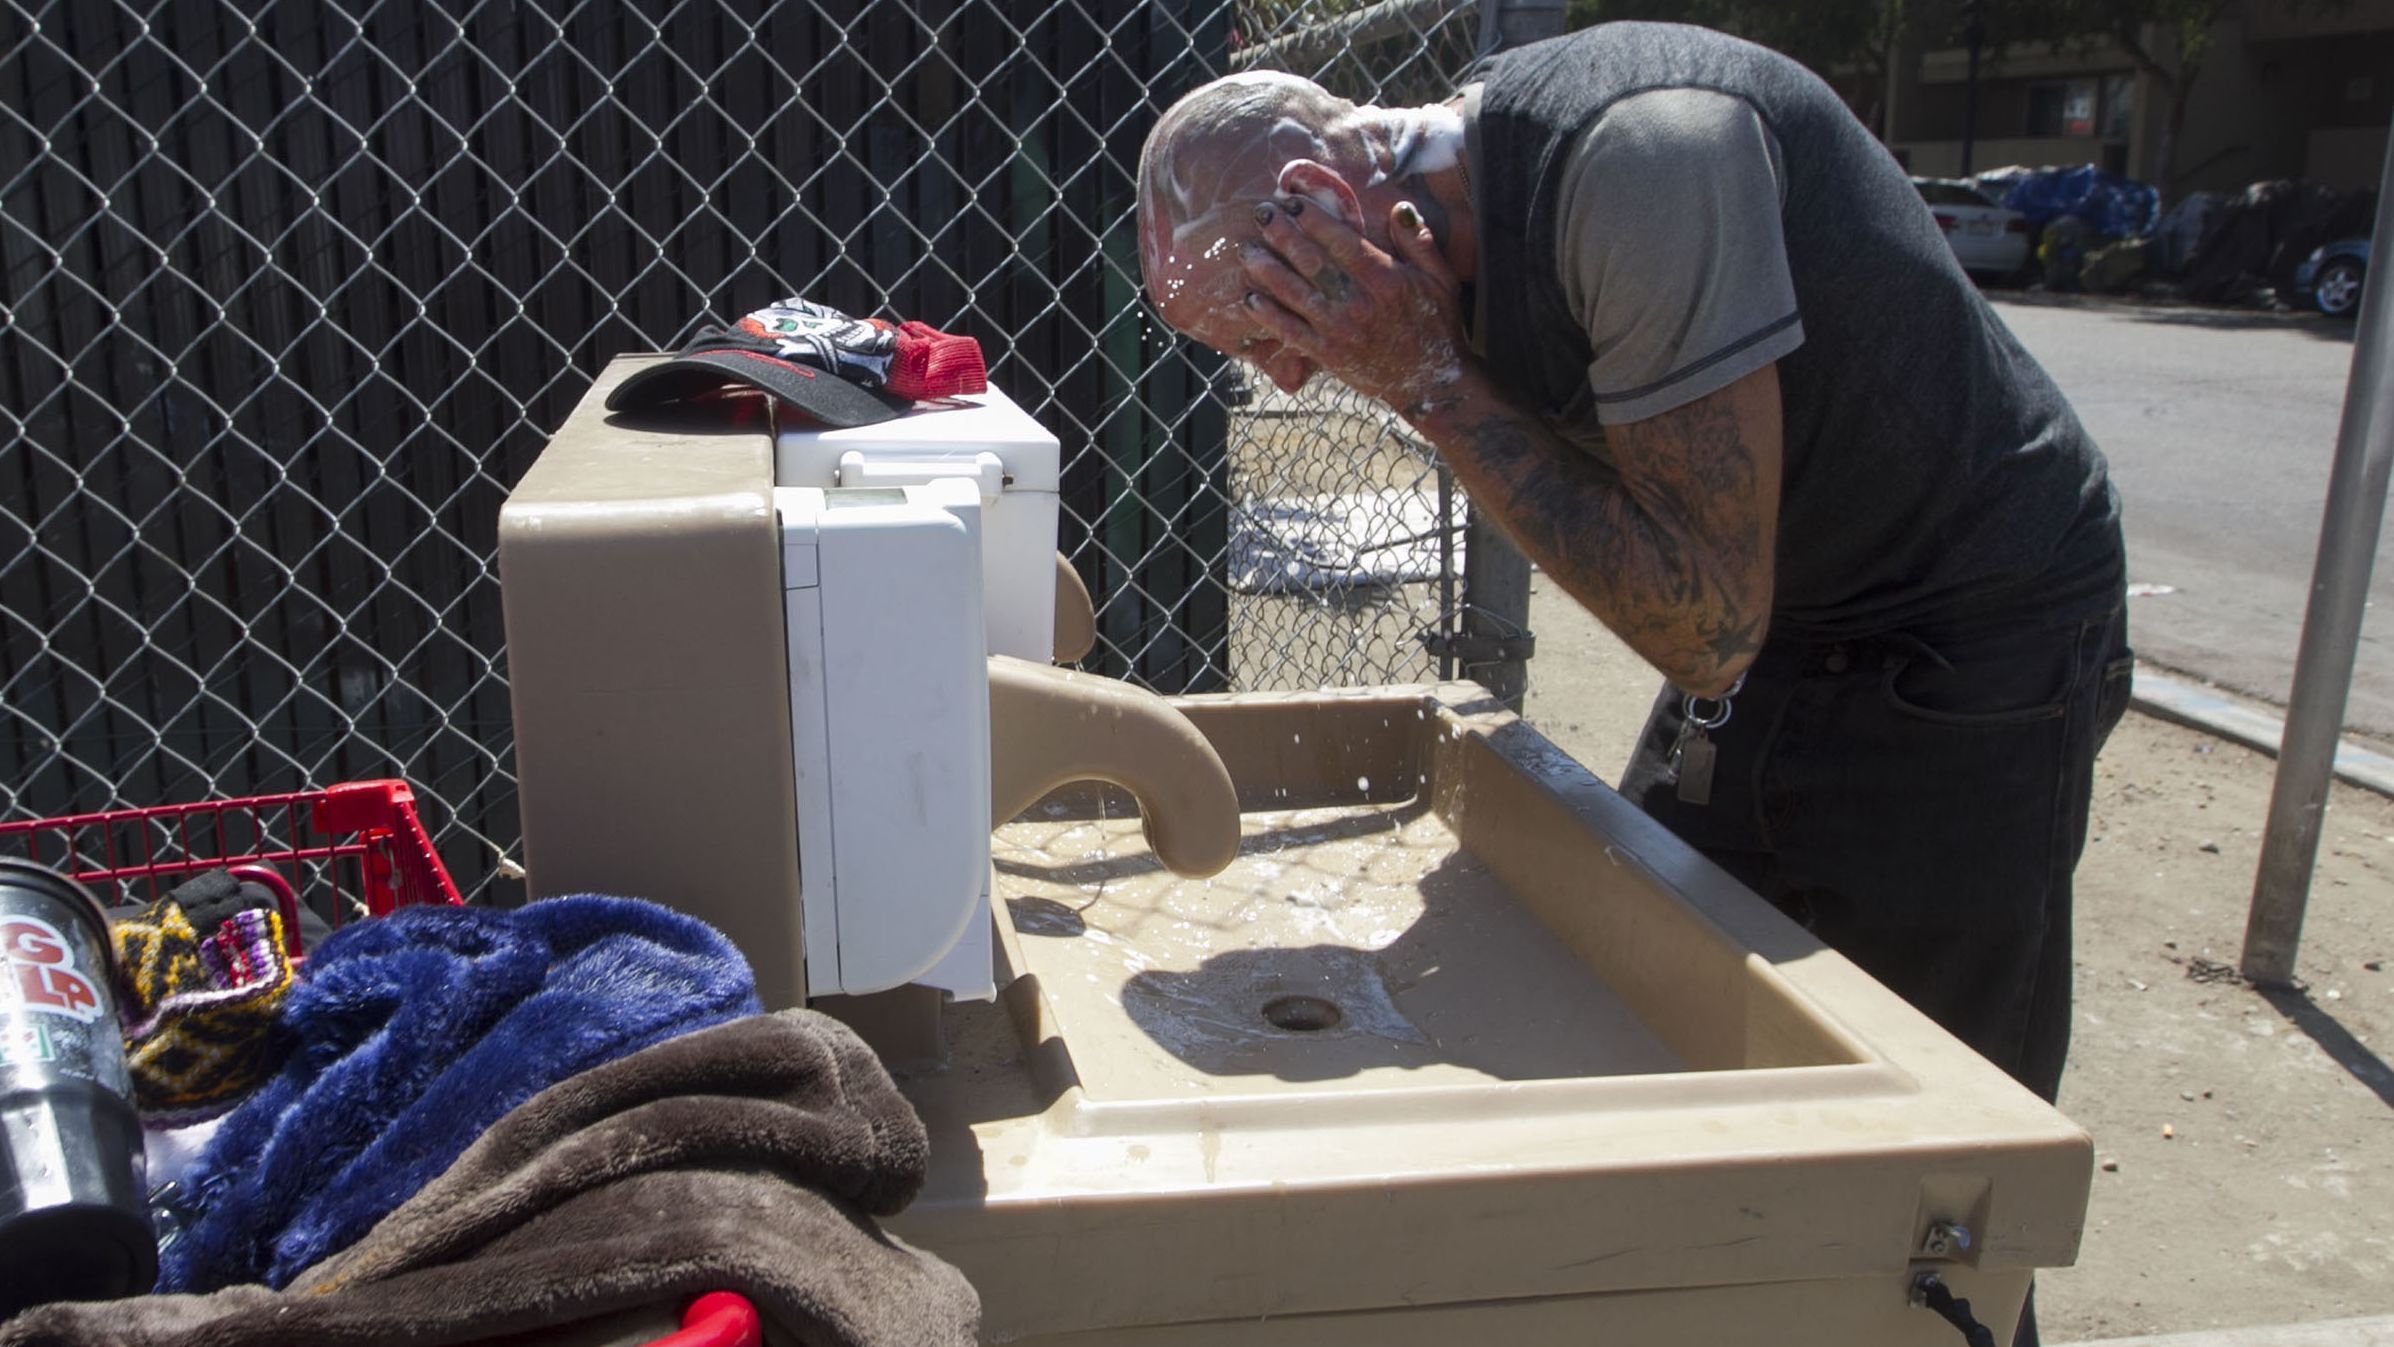 Jaime Lynn Hines cleans up at a hand-washing station installed by San Diego County.